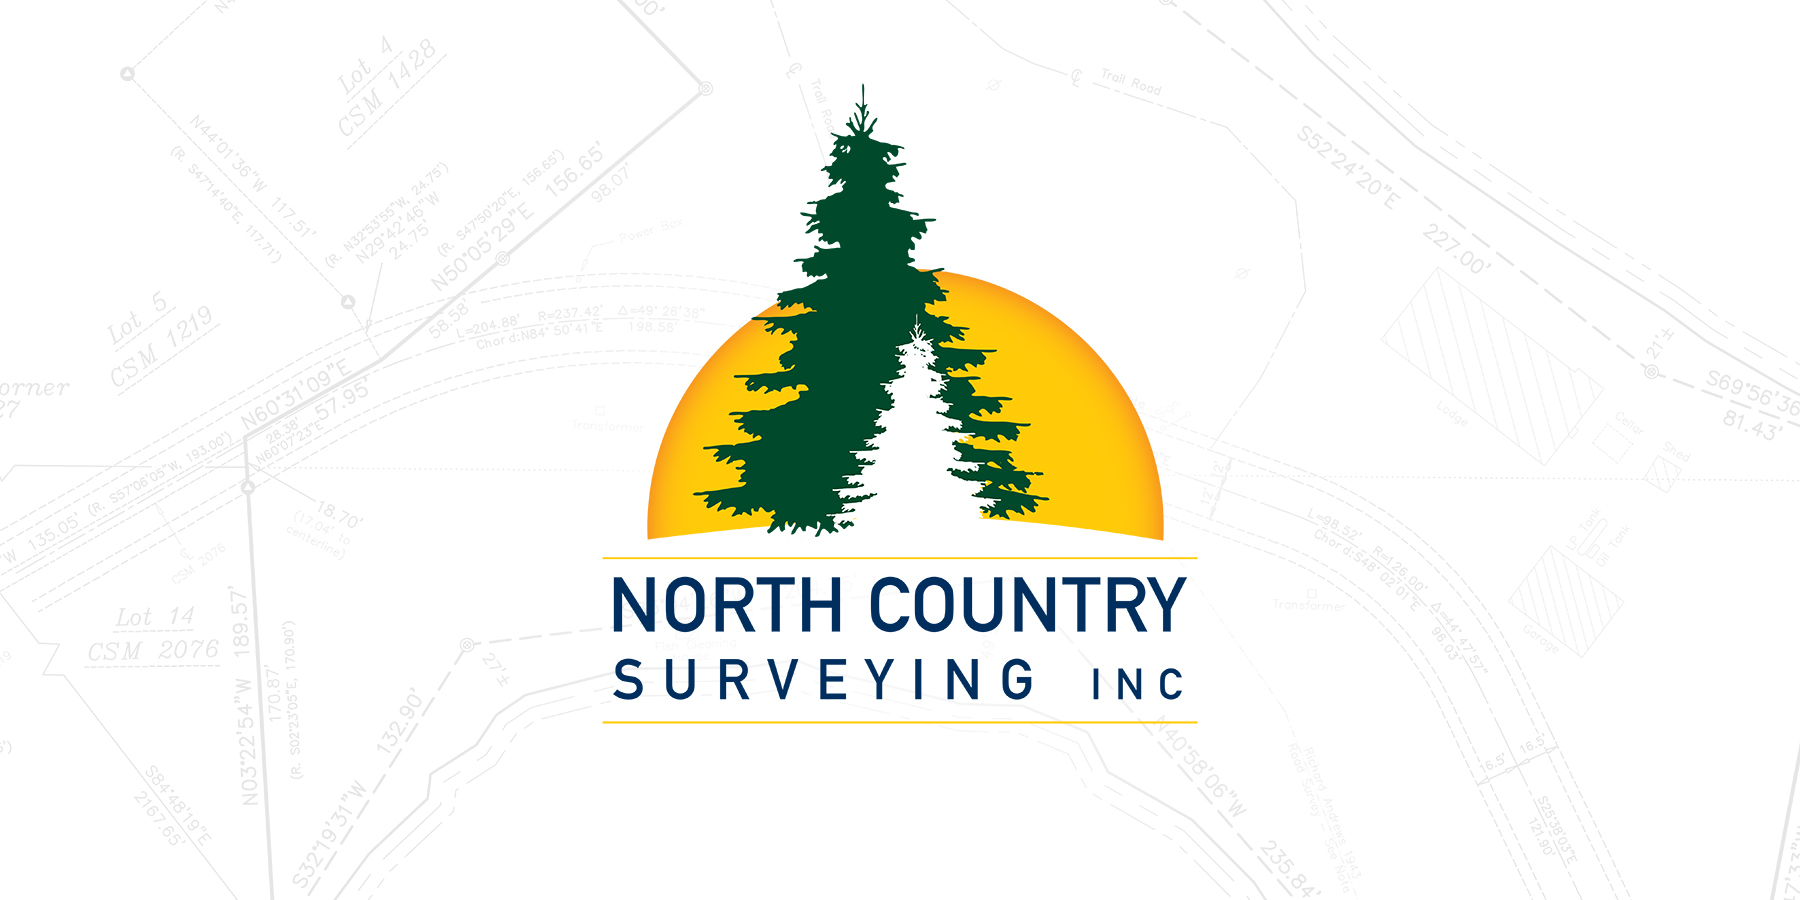 North Country Surveying